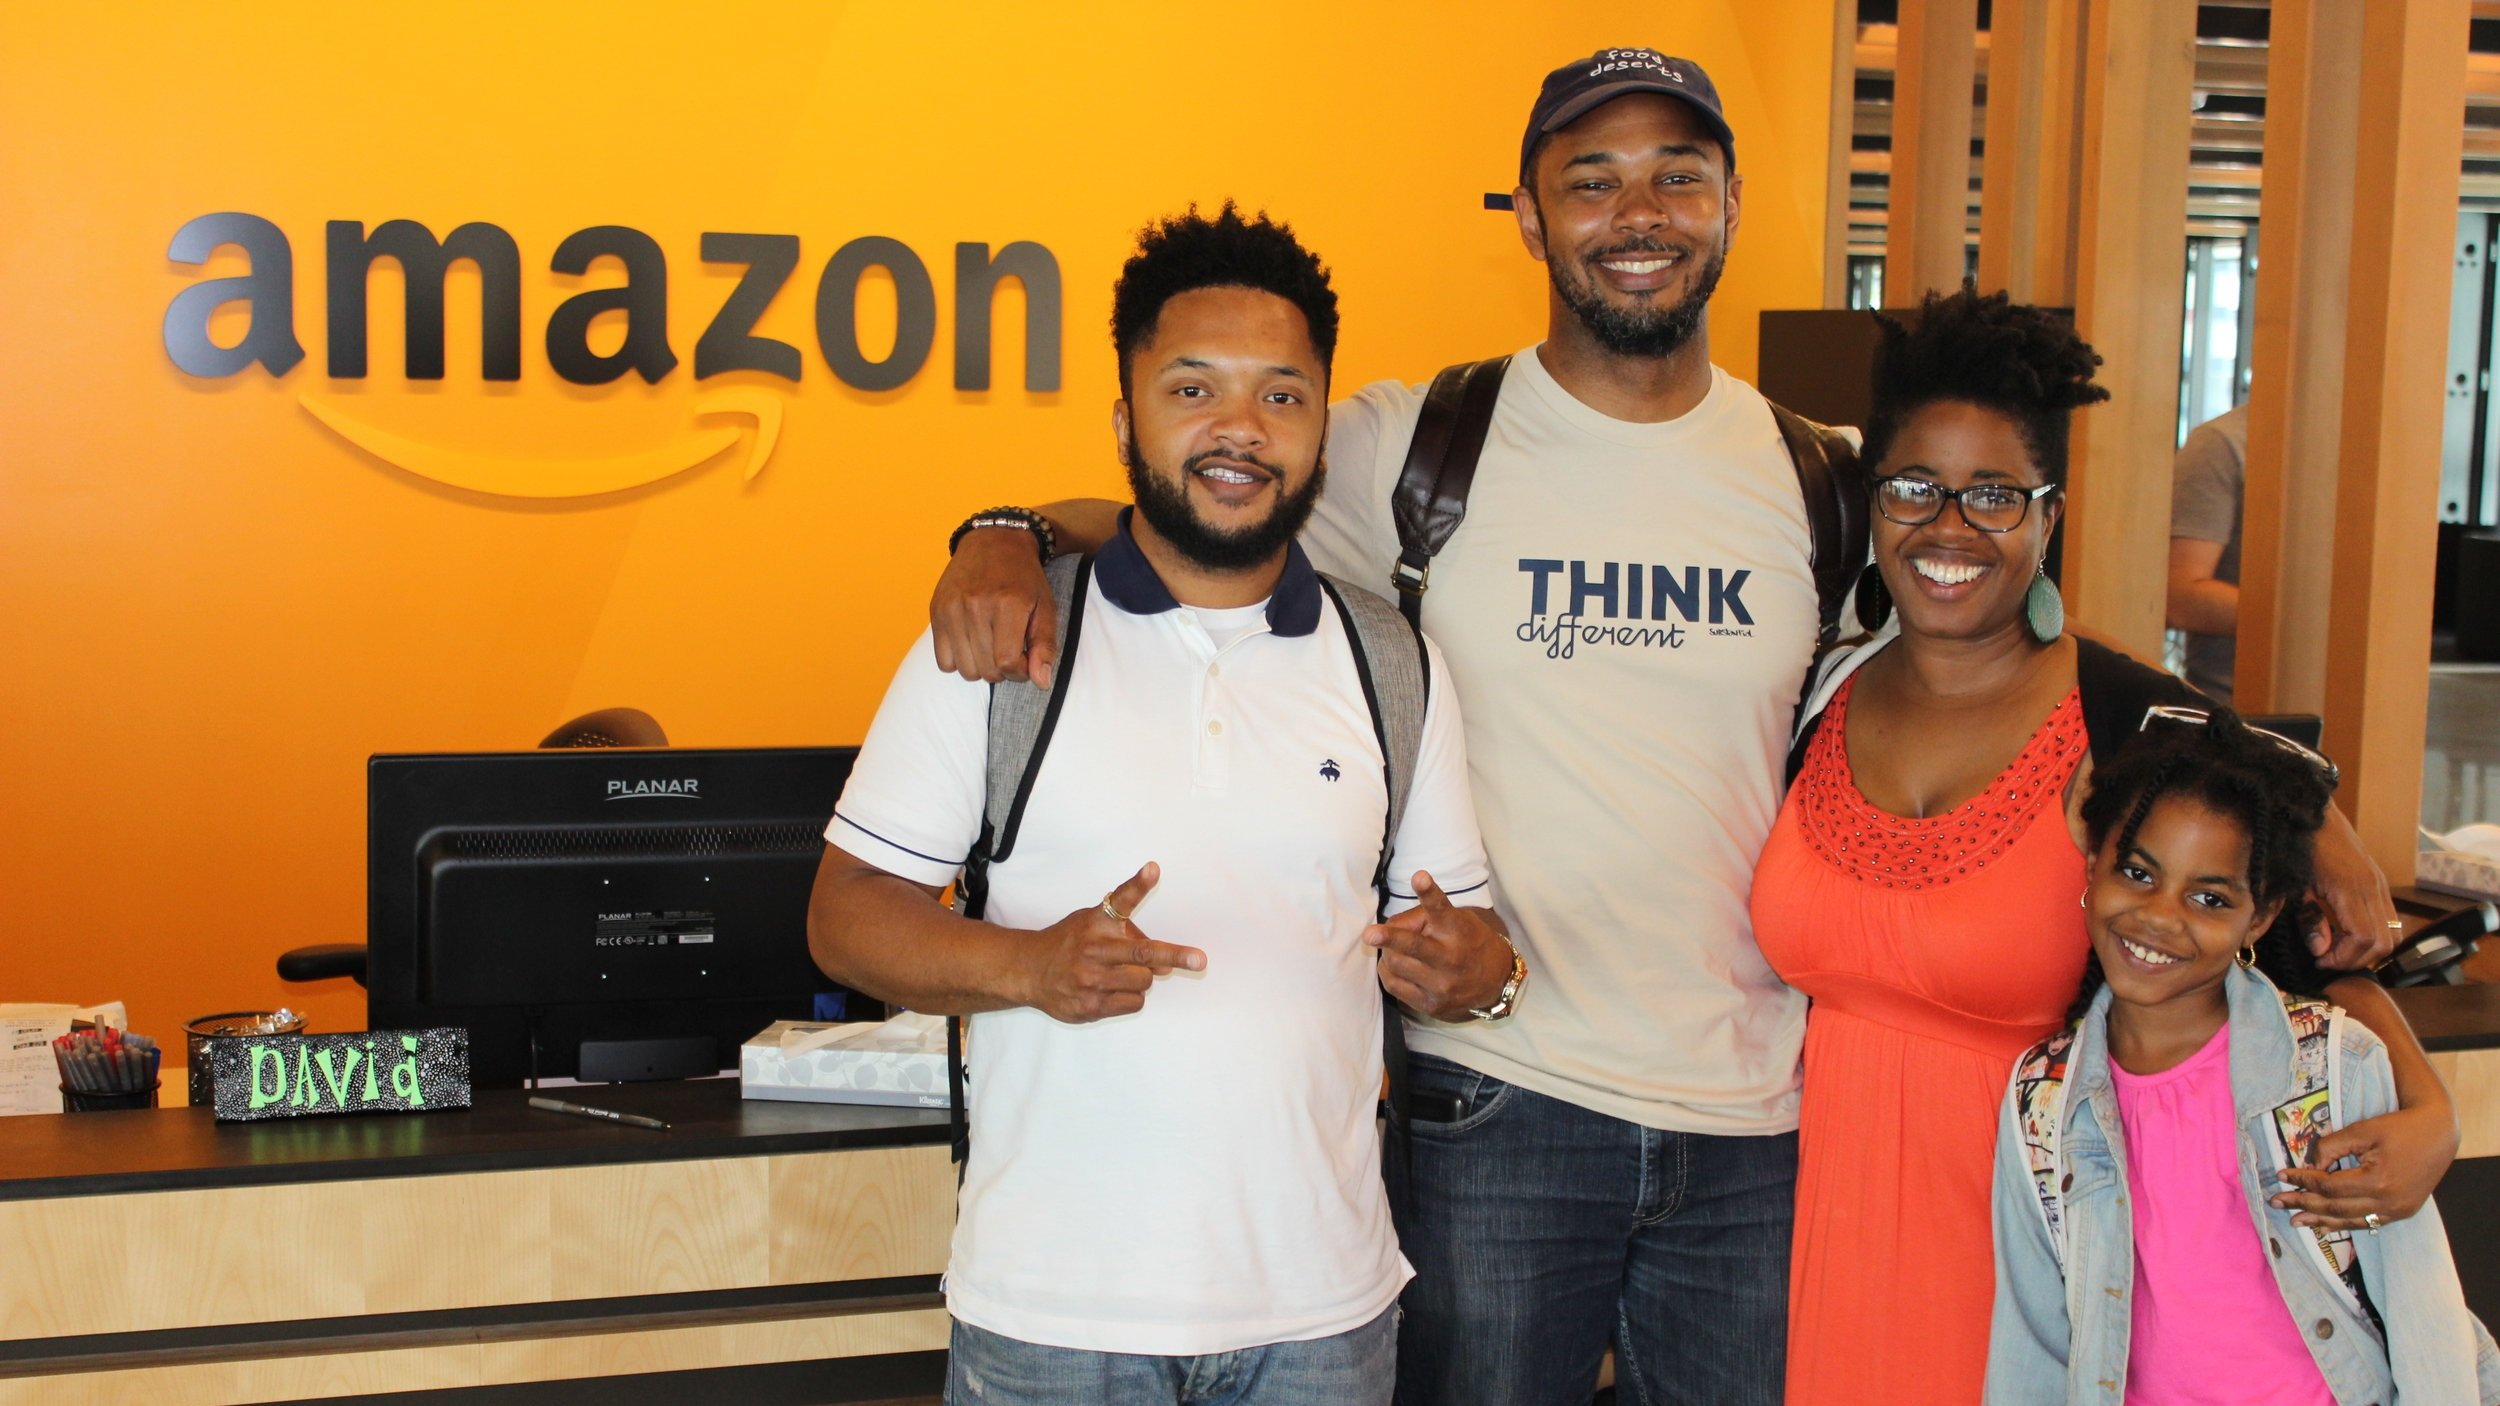 S.A.M. at Amazon HQ in Seattle